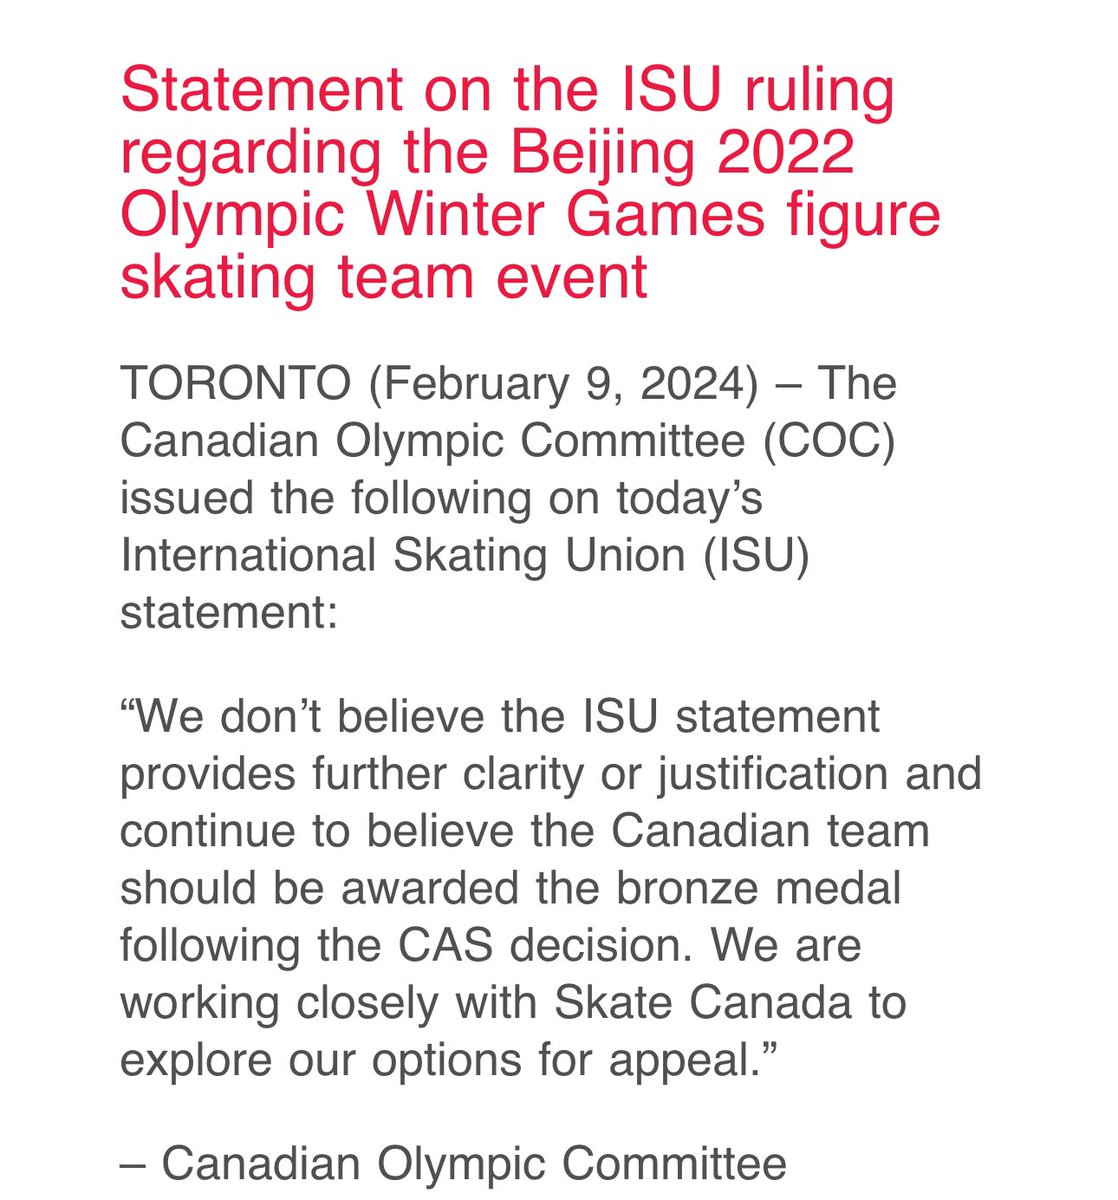 The ISU released a statement today — which basically said Canada would not be getting bronze. The Canadian Olympic Committee fires back with this strong statement. “We don’t believe the ISU statement provides further clarity … Canadian team should be awarded bronze”